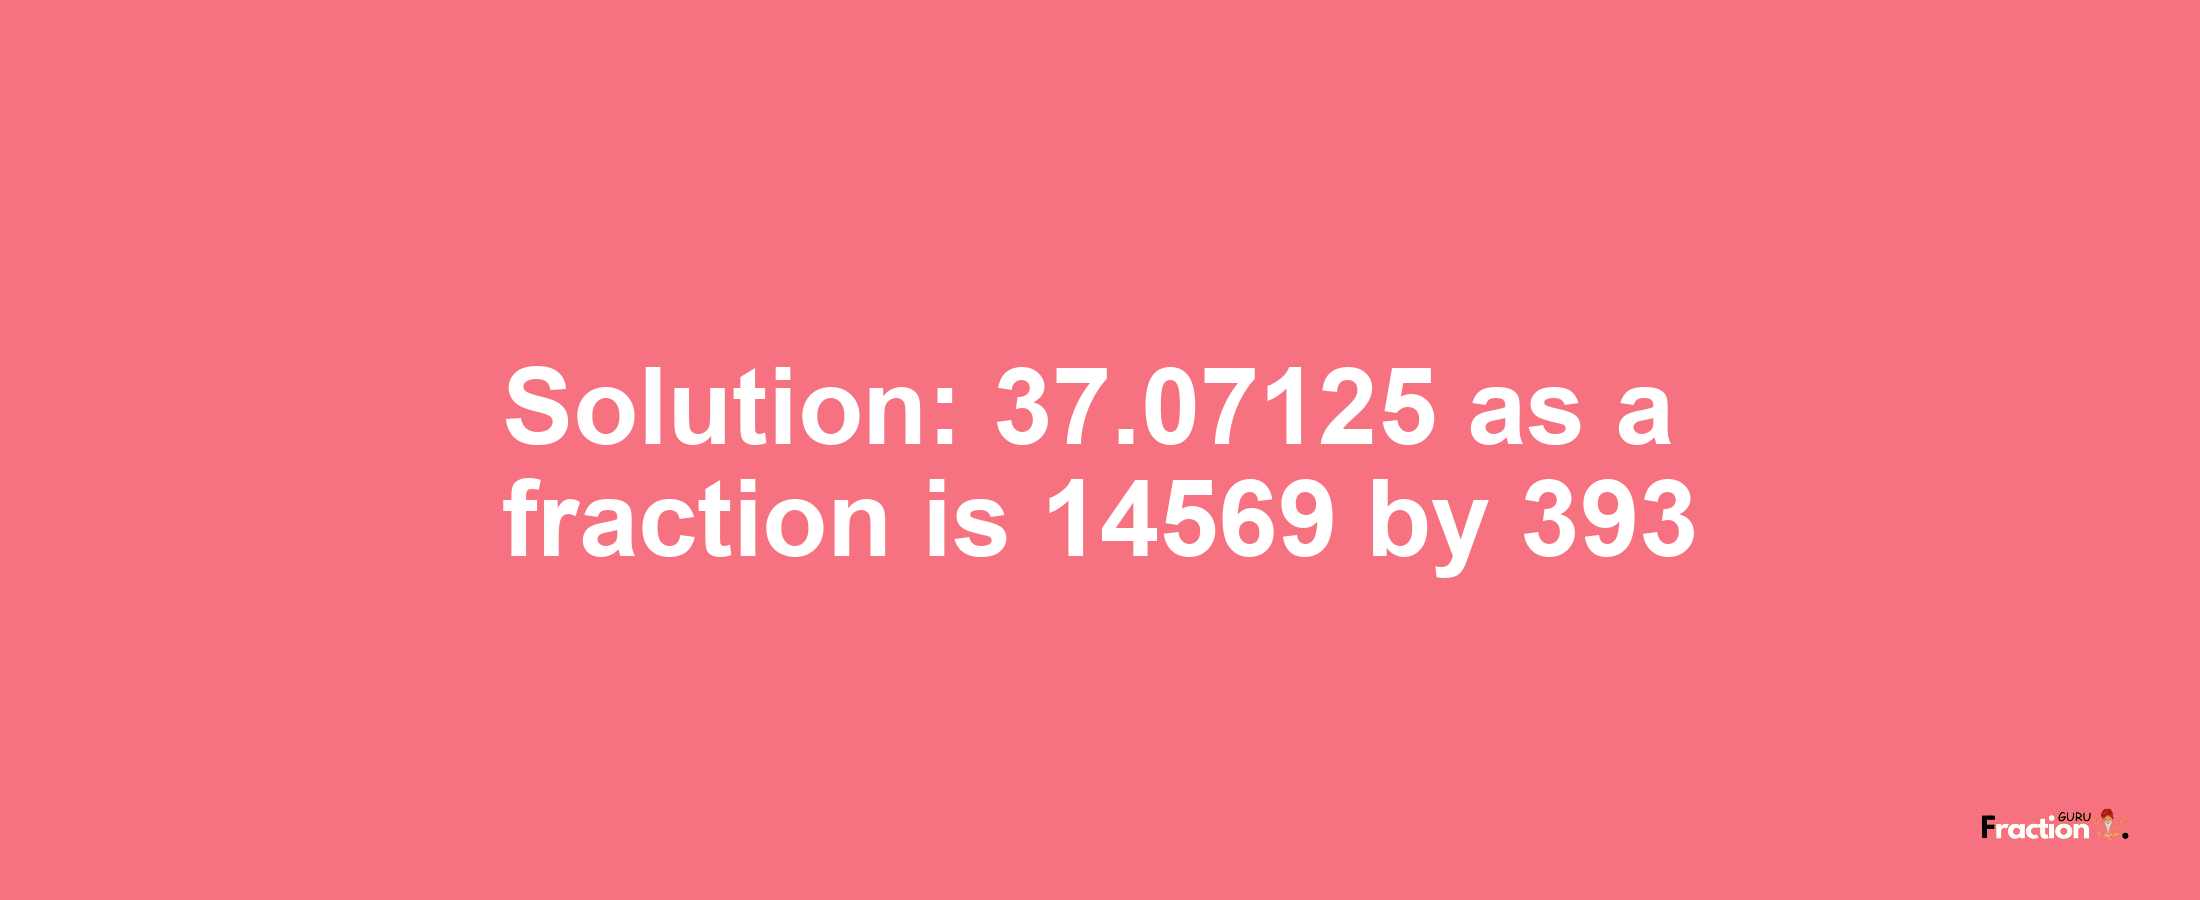 Solution:37.07125 as a fraction is 14569/393